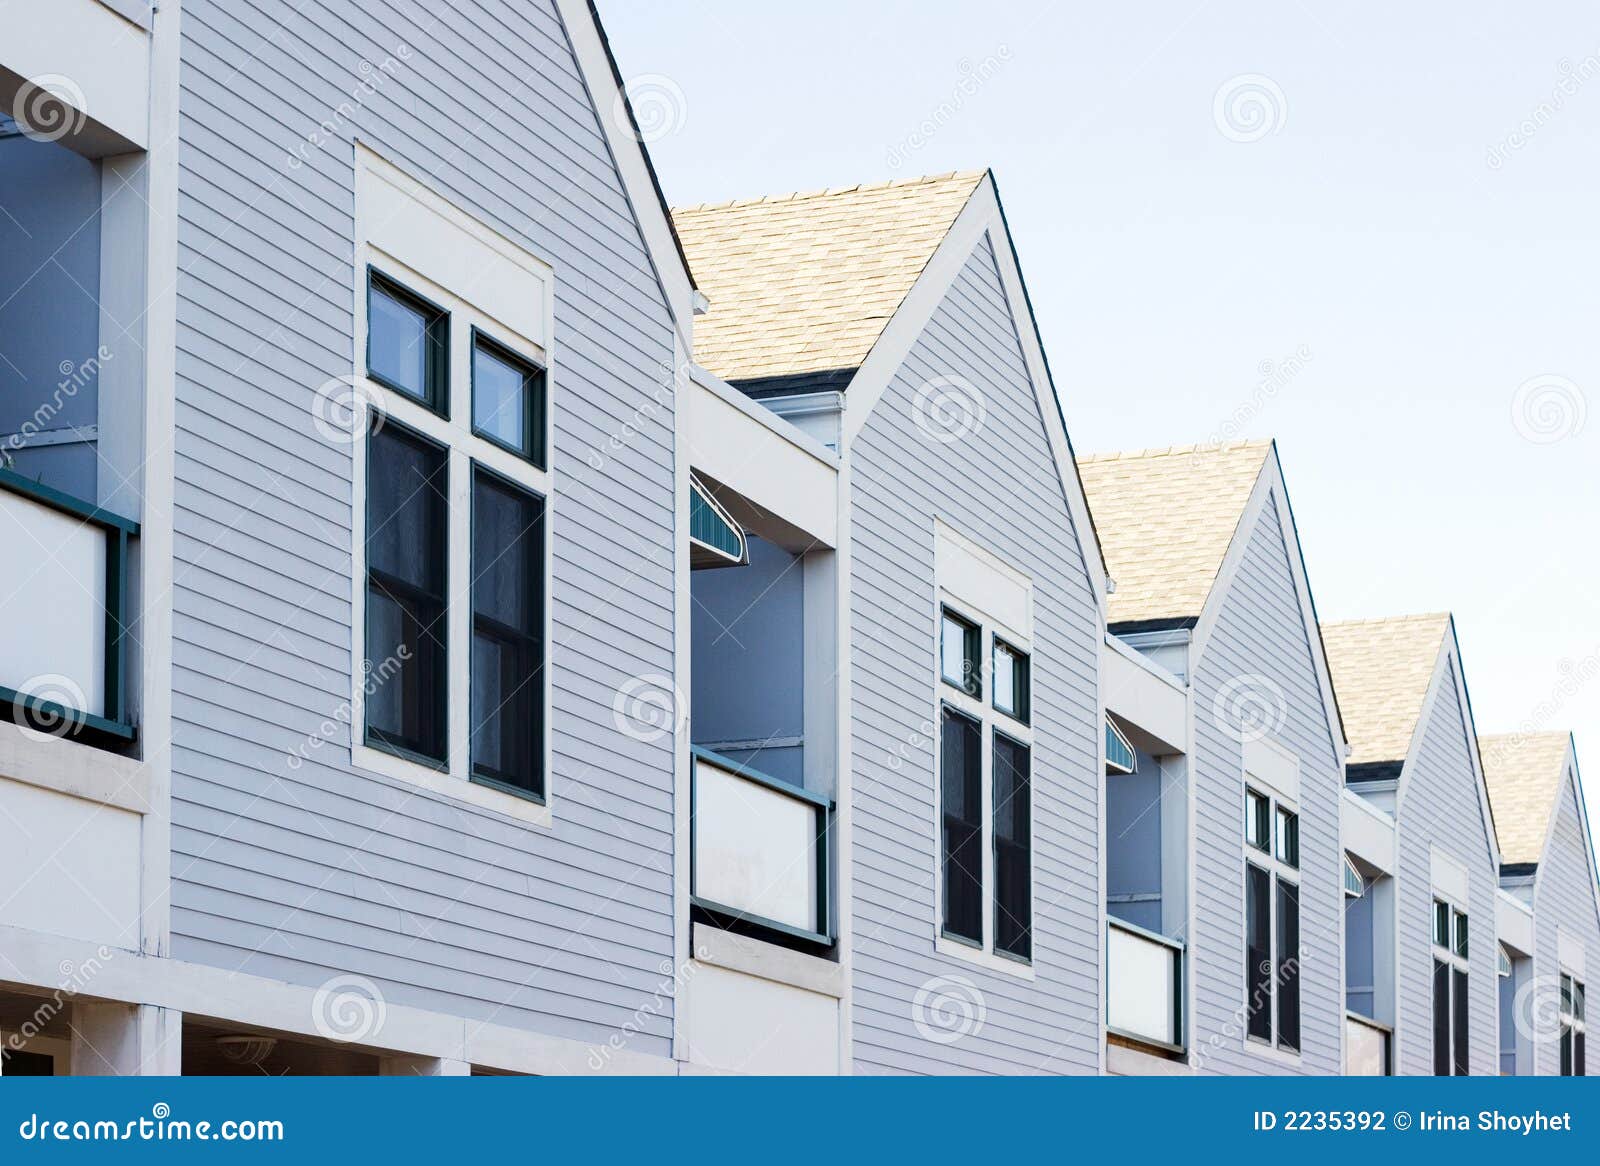 houses in a row